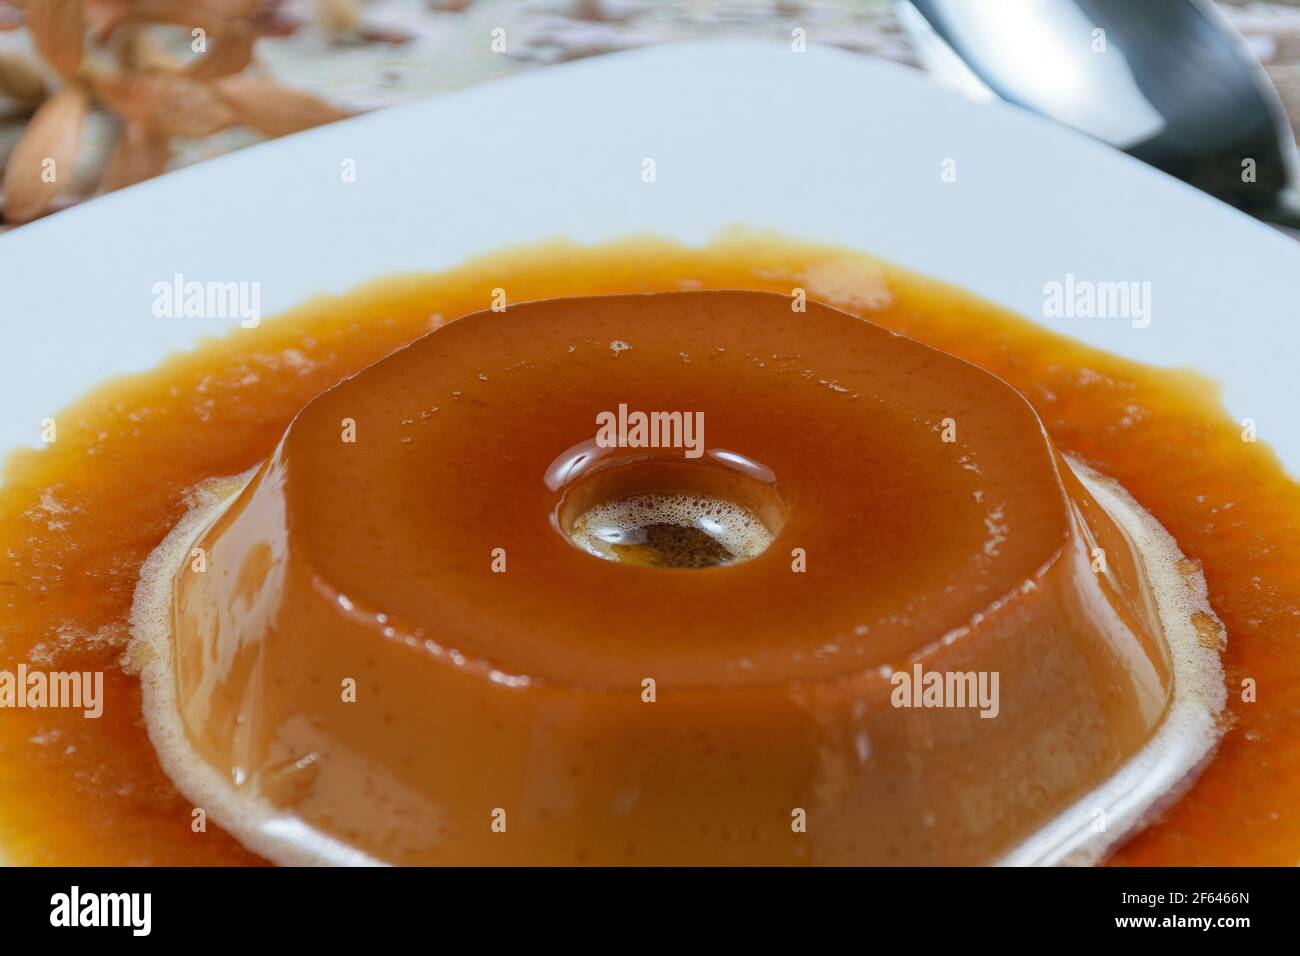 Closeup on the central circle of dulce de leche pudding with caramel sauce, selective focus. A traditional Brazilian sweet. Stock Photo